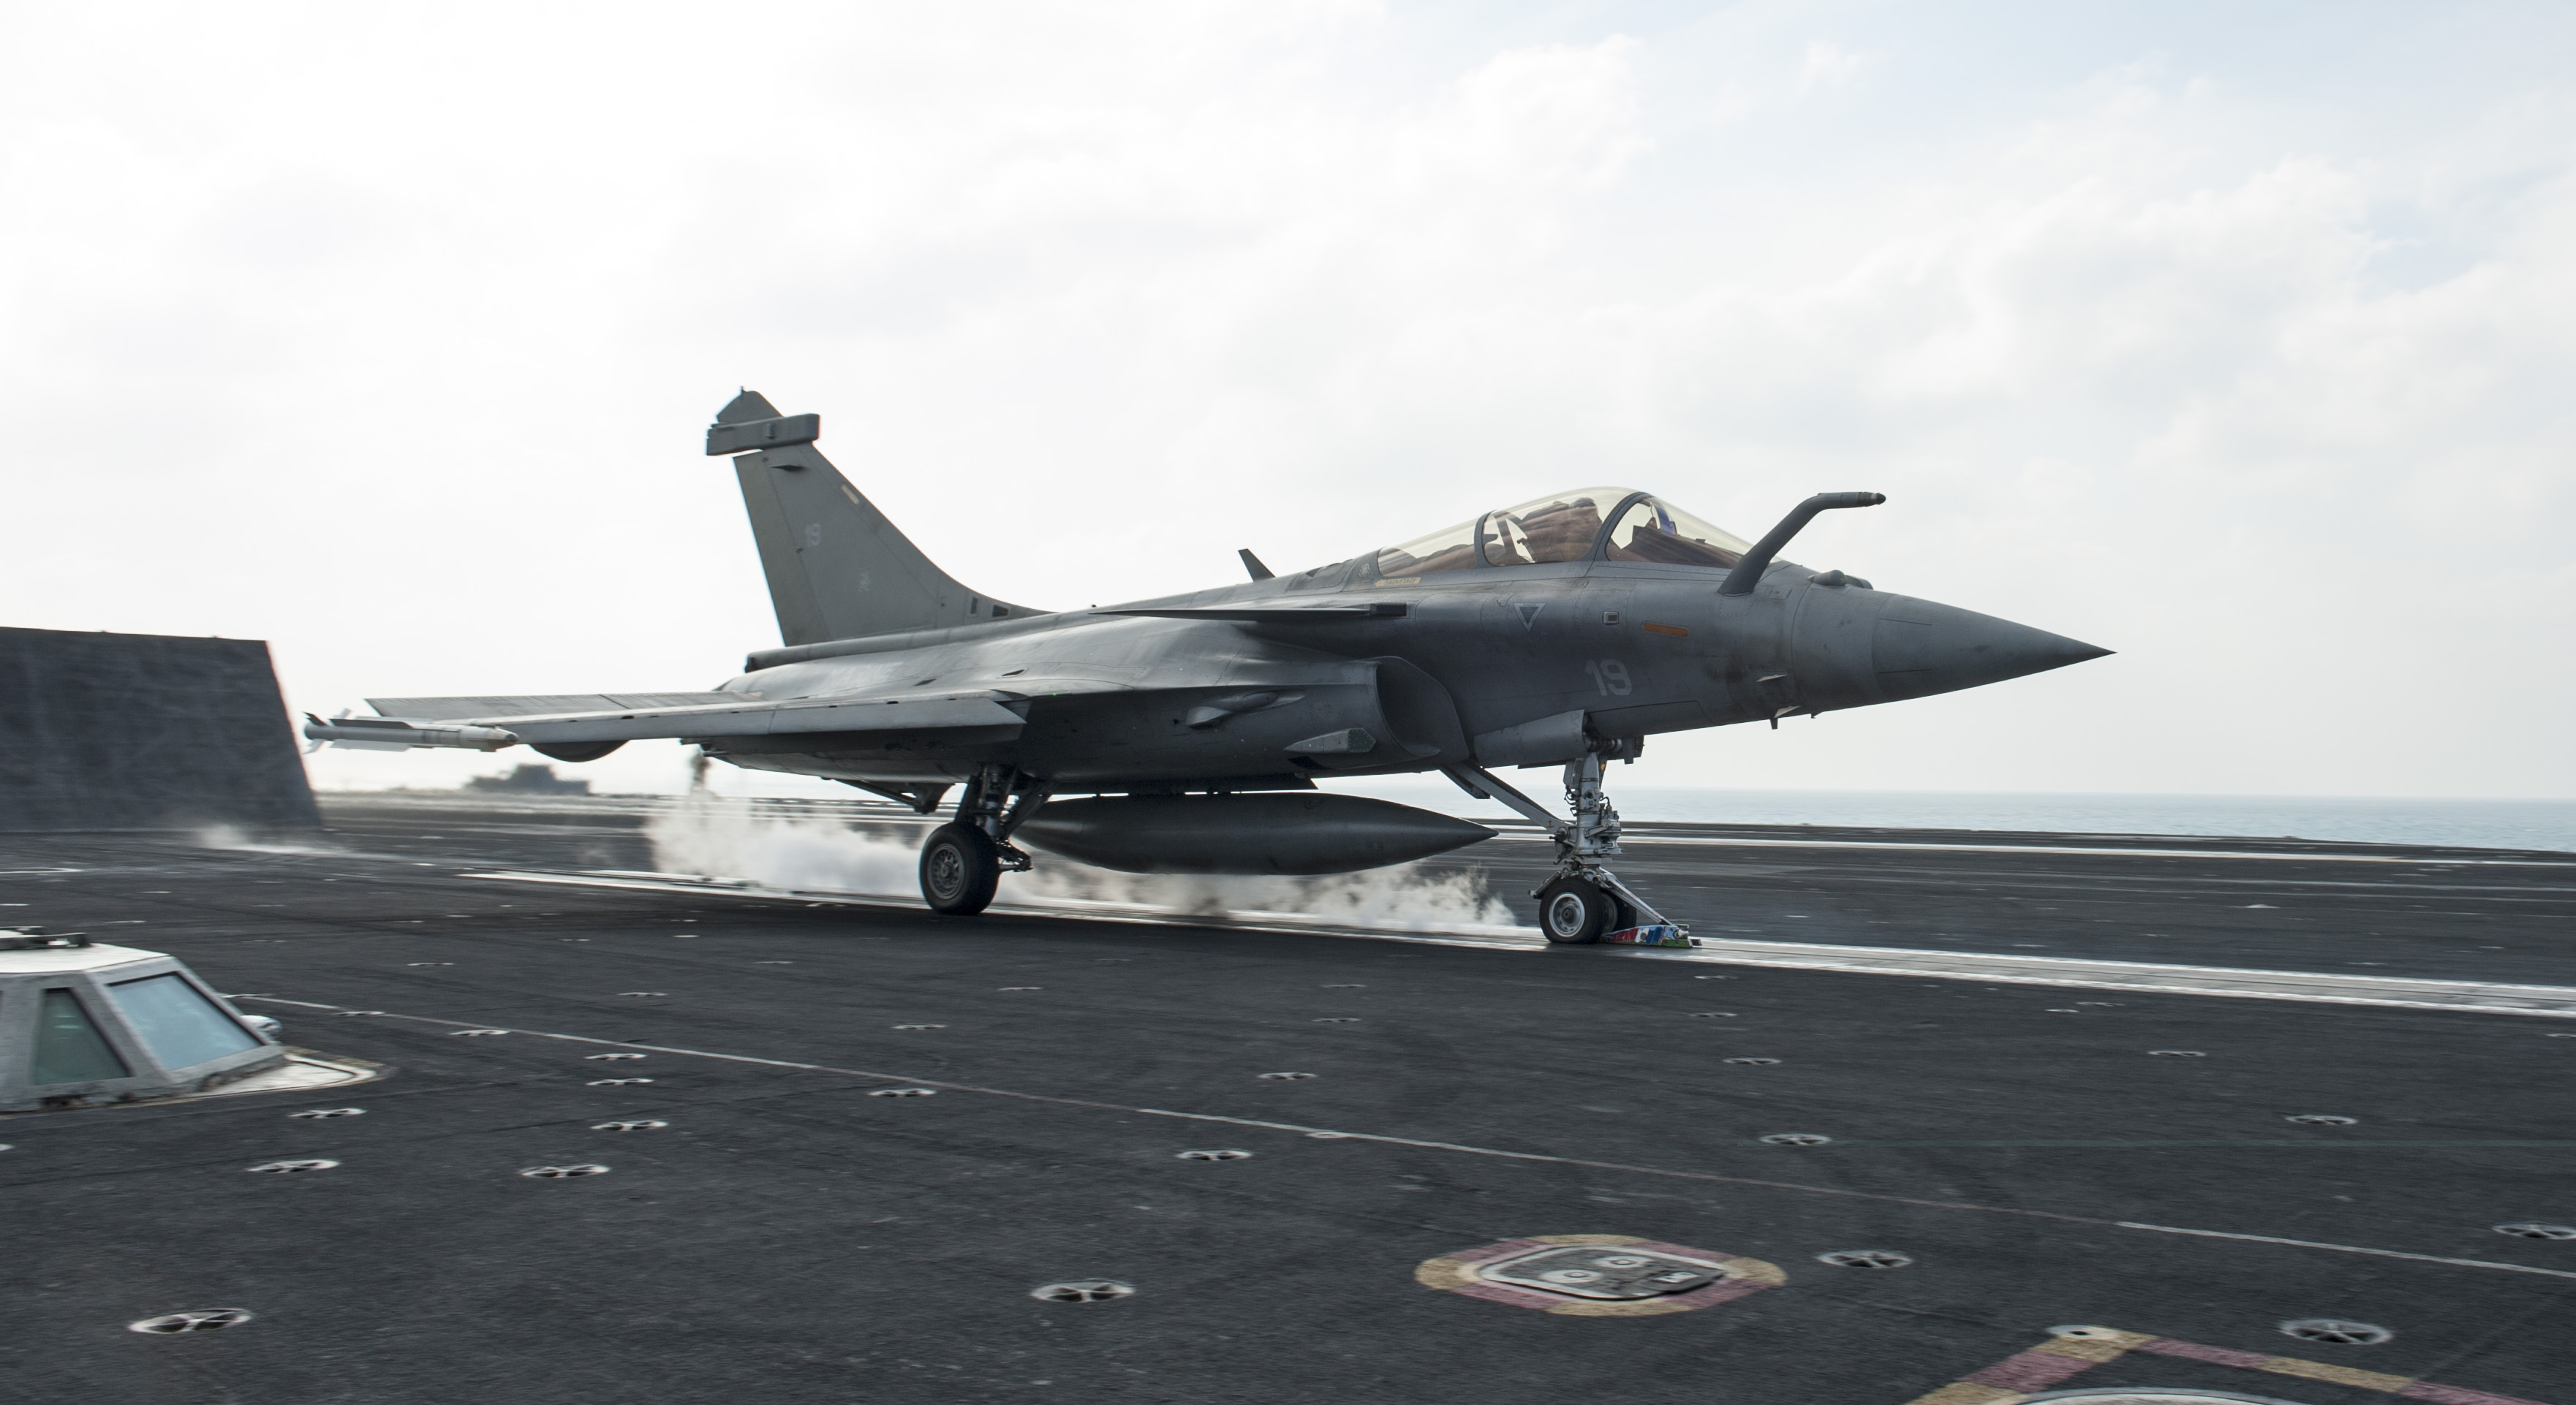 French_Rafale_is_launched_from_USS_Harry_S._Truman_(CVN-75)_in_2014.JPG